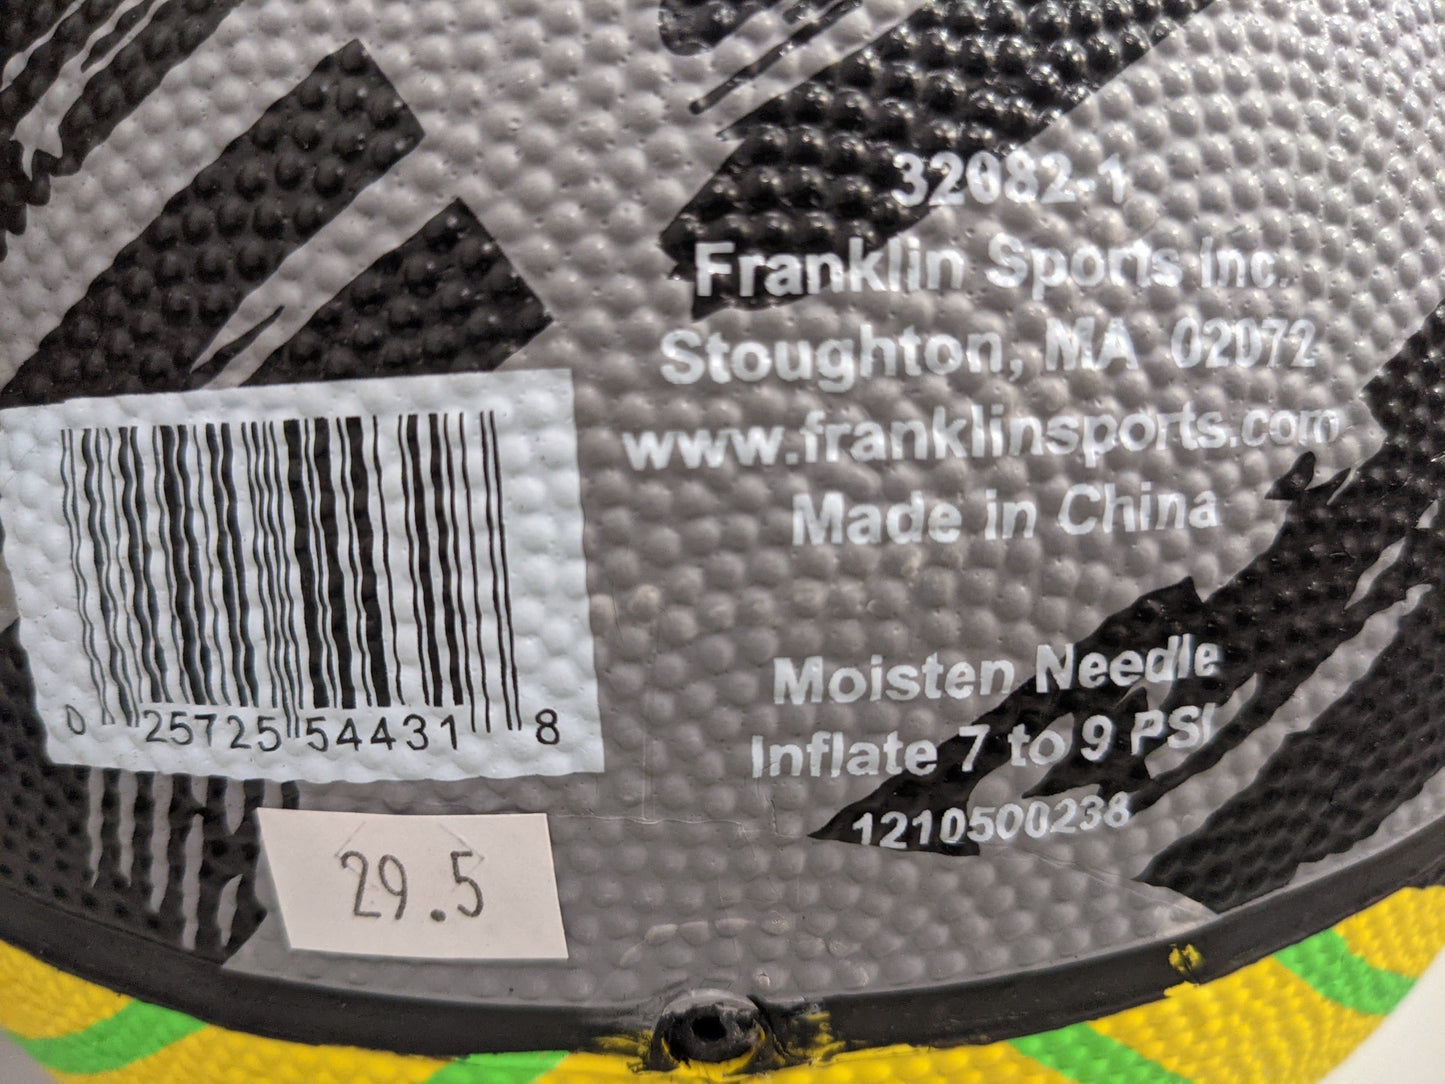 Franklin Official Size & Weight Basketball, Size 29.5, Multicolored, NEW